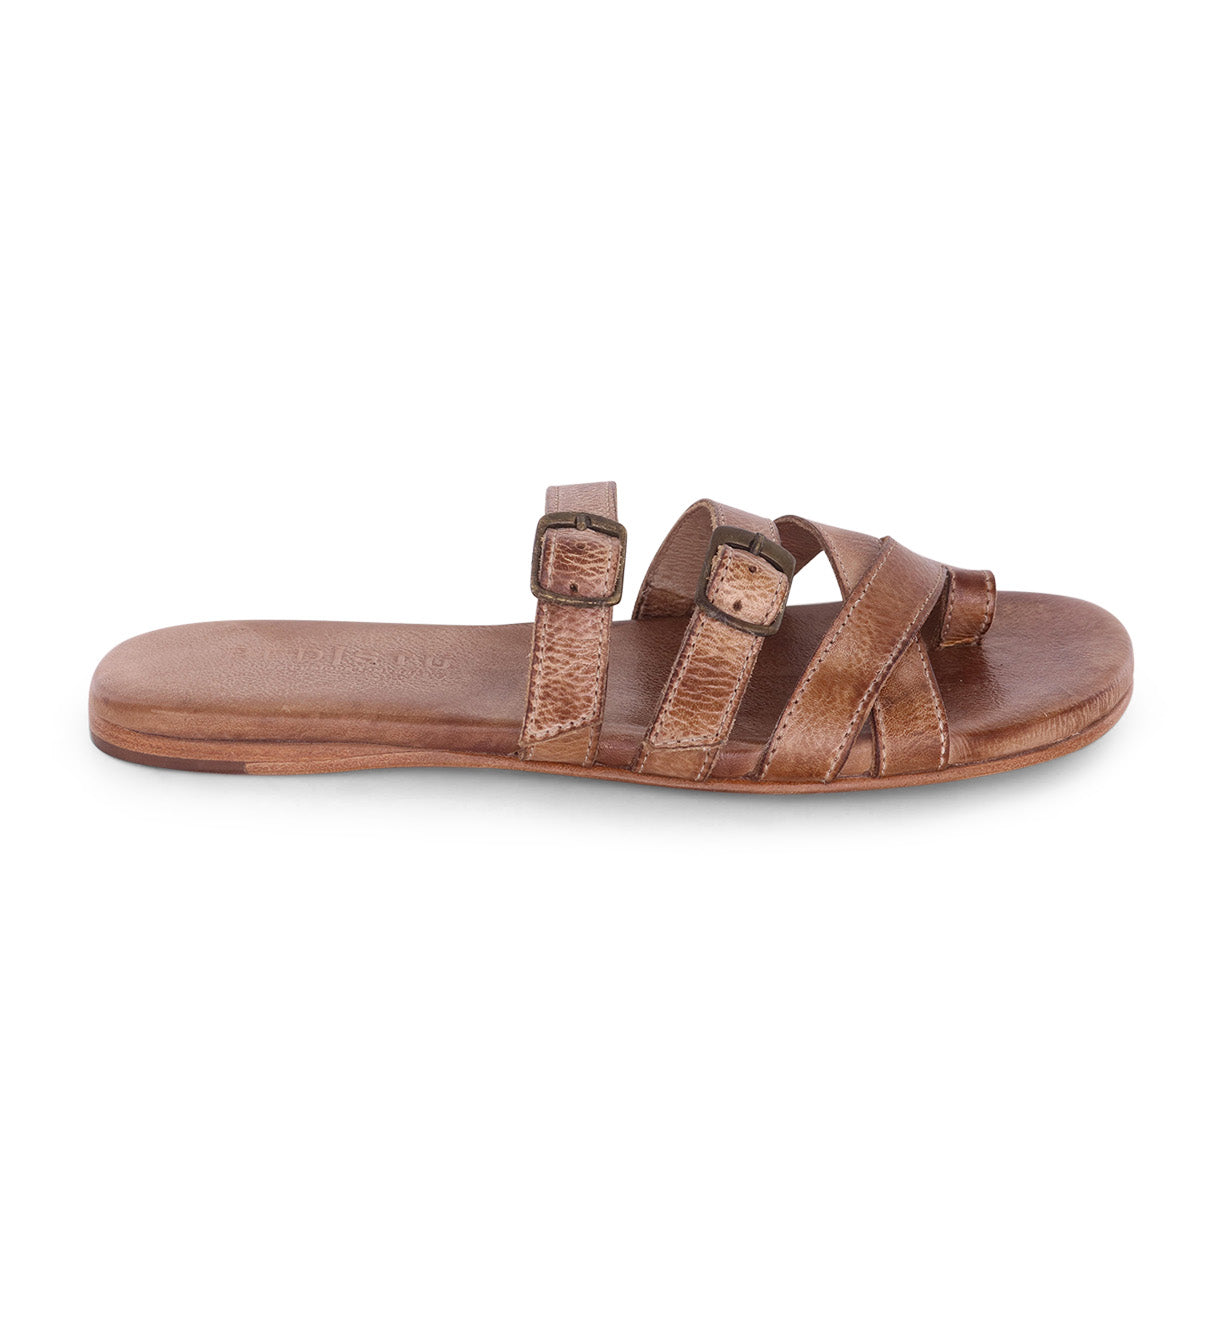 Hilda brown leather sandals with straps by Bed Stu.